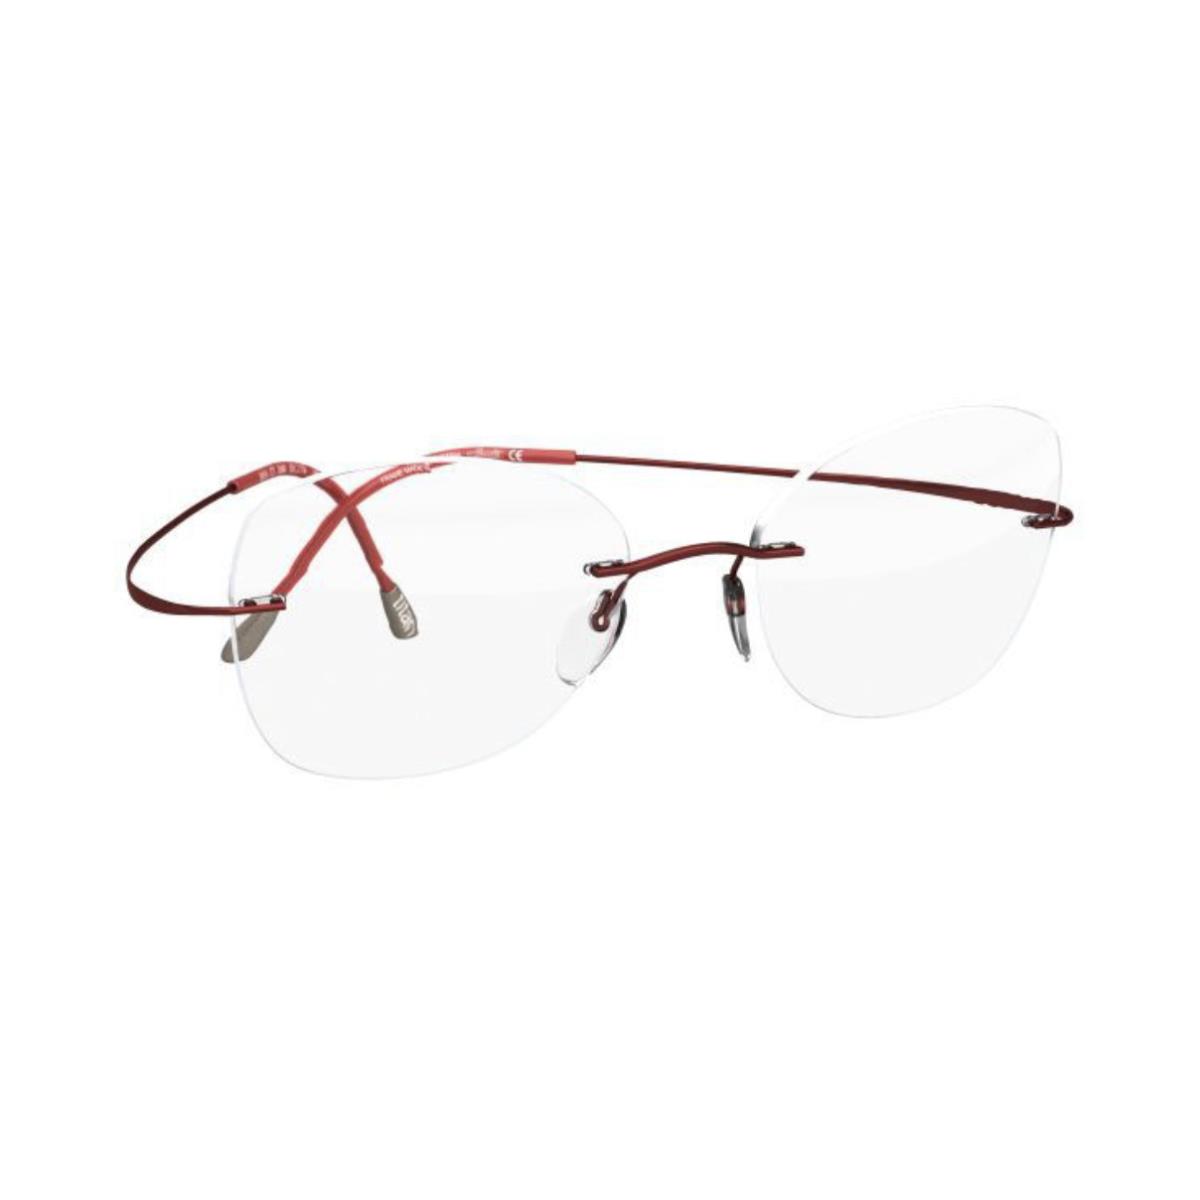 Silhouette 5515 Rimless Eyeglasses Titan Minimal Art The Must Collection Frames WINE - 3040, SIZE: 53-17 140, SHAPE - CT